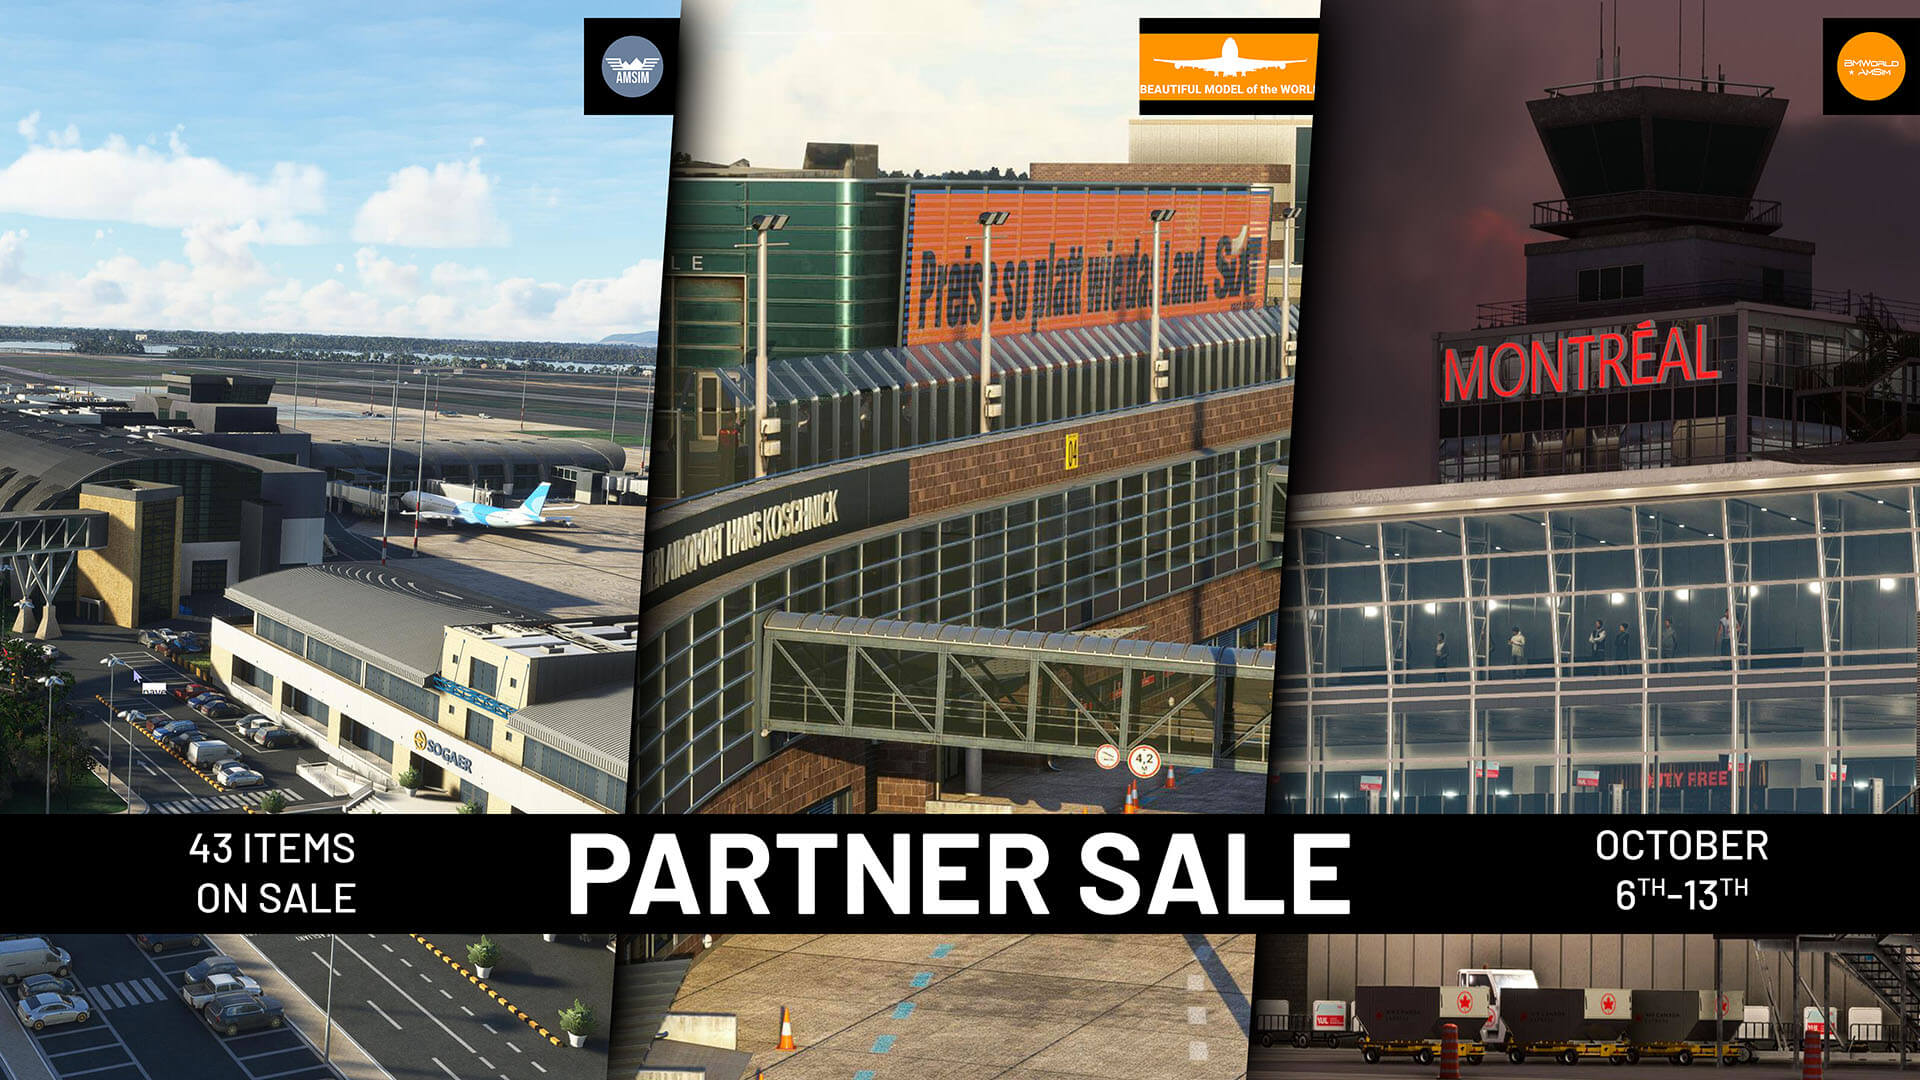 Partner Sale: AmSim, Beautiful Model of the World, and BMWorld & AmSim. 43 Items on sale, runs from October 6th to 13th.